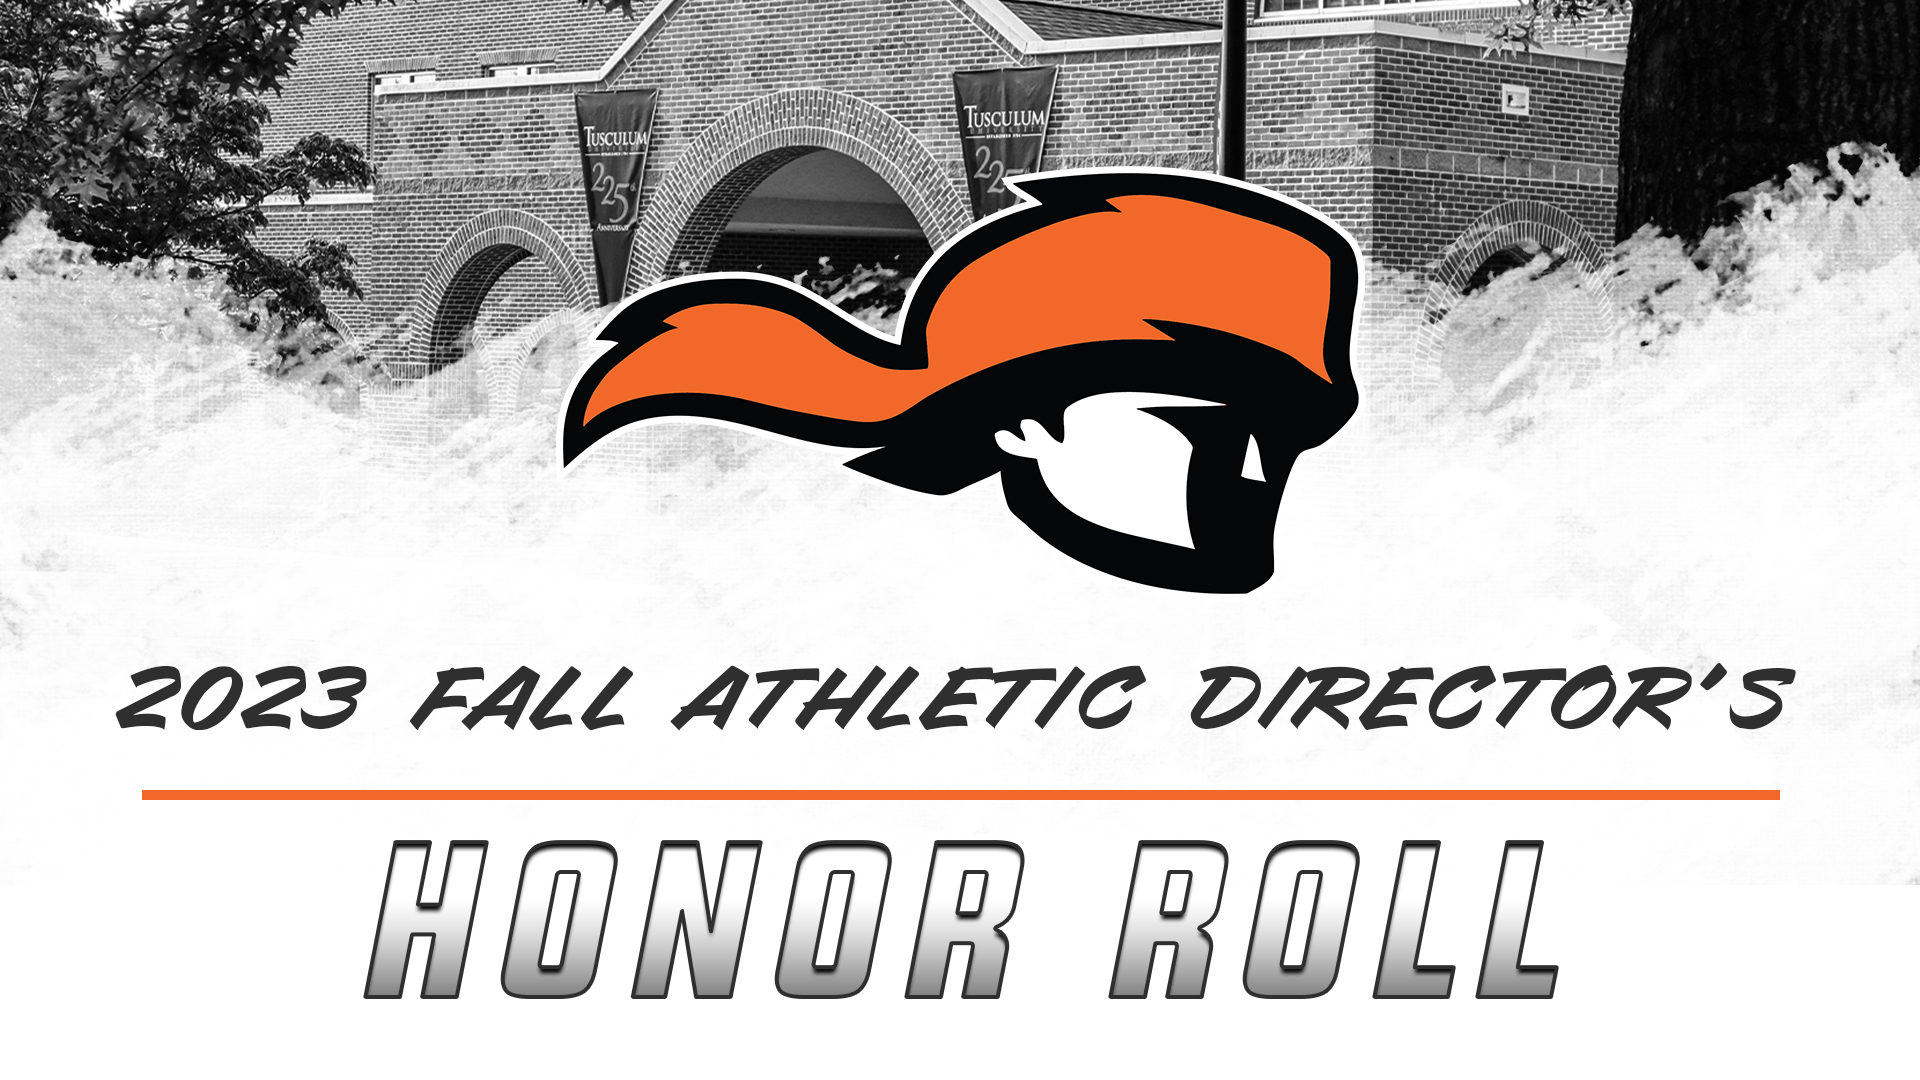 School-record 457 Pioneers named to Athletic Director's Honor Roll